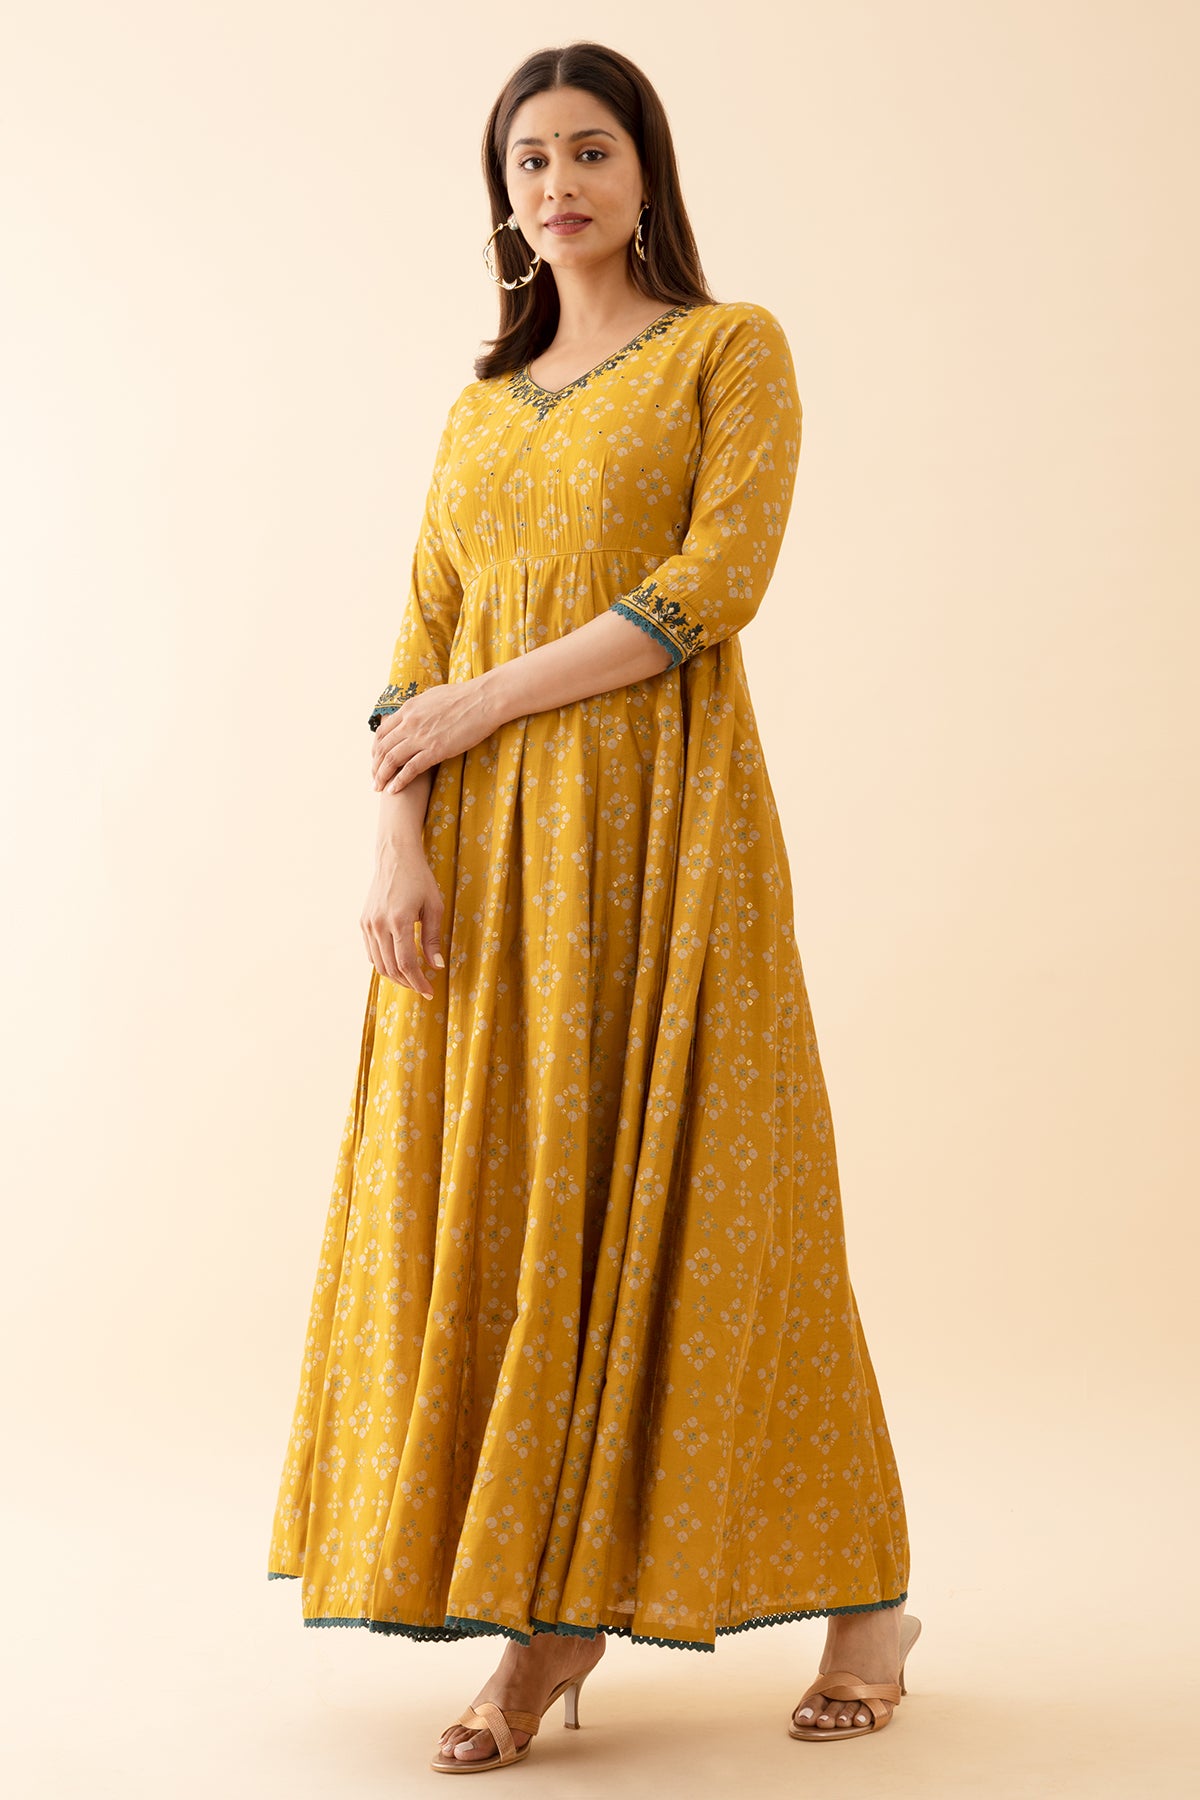 Ditsy Floral Printed Anarkali with Jewel Inspired Neckline - Mustard